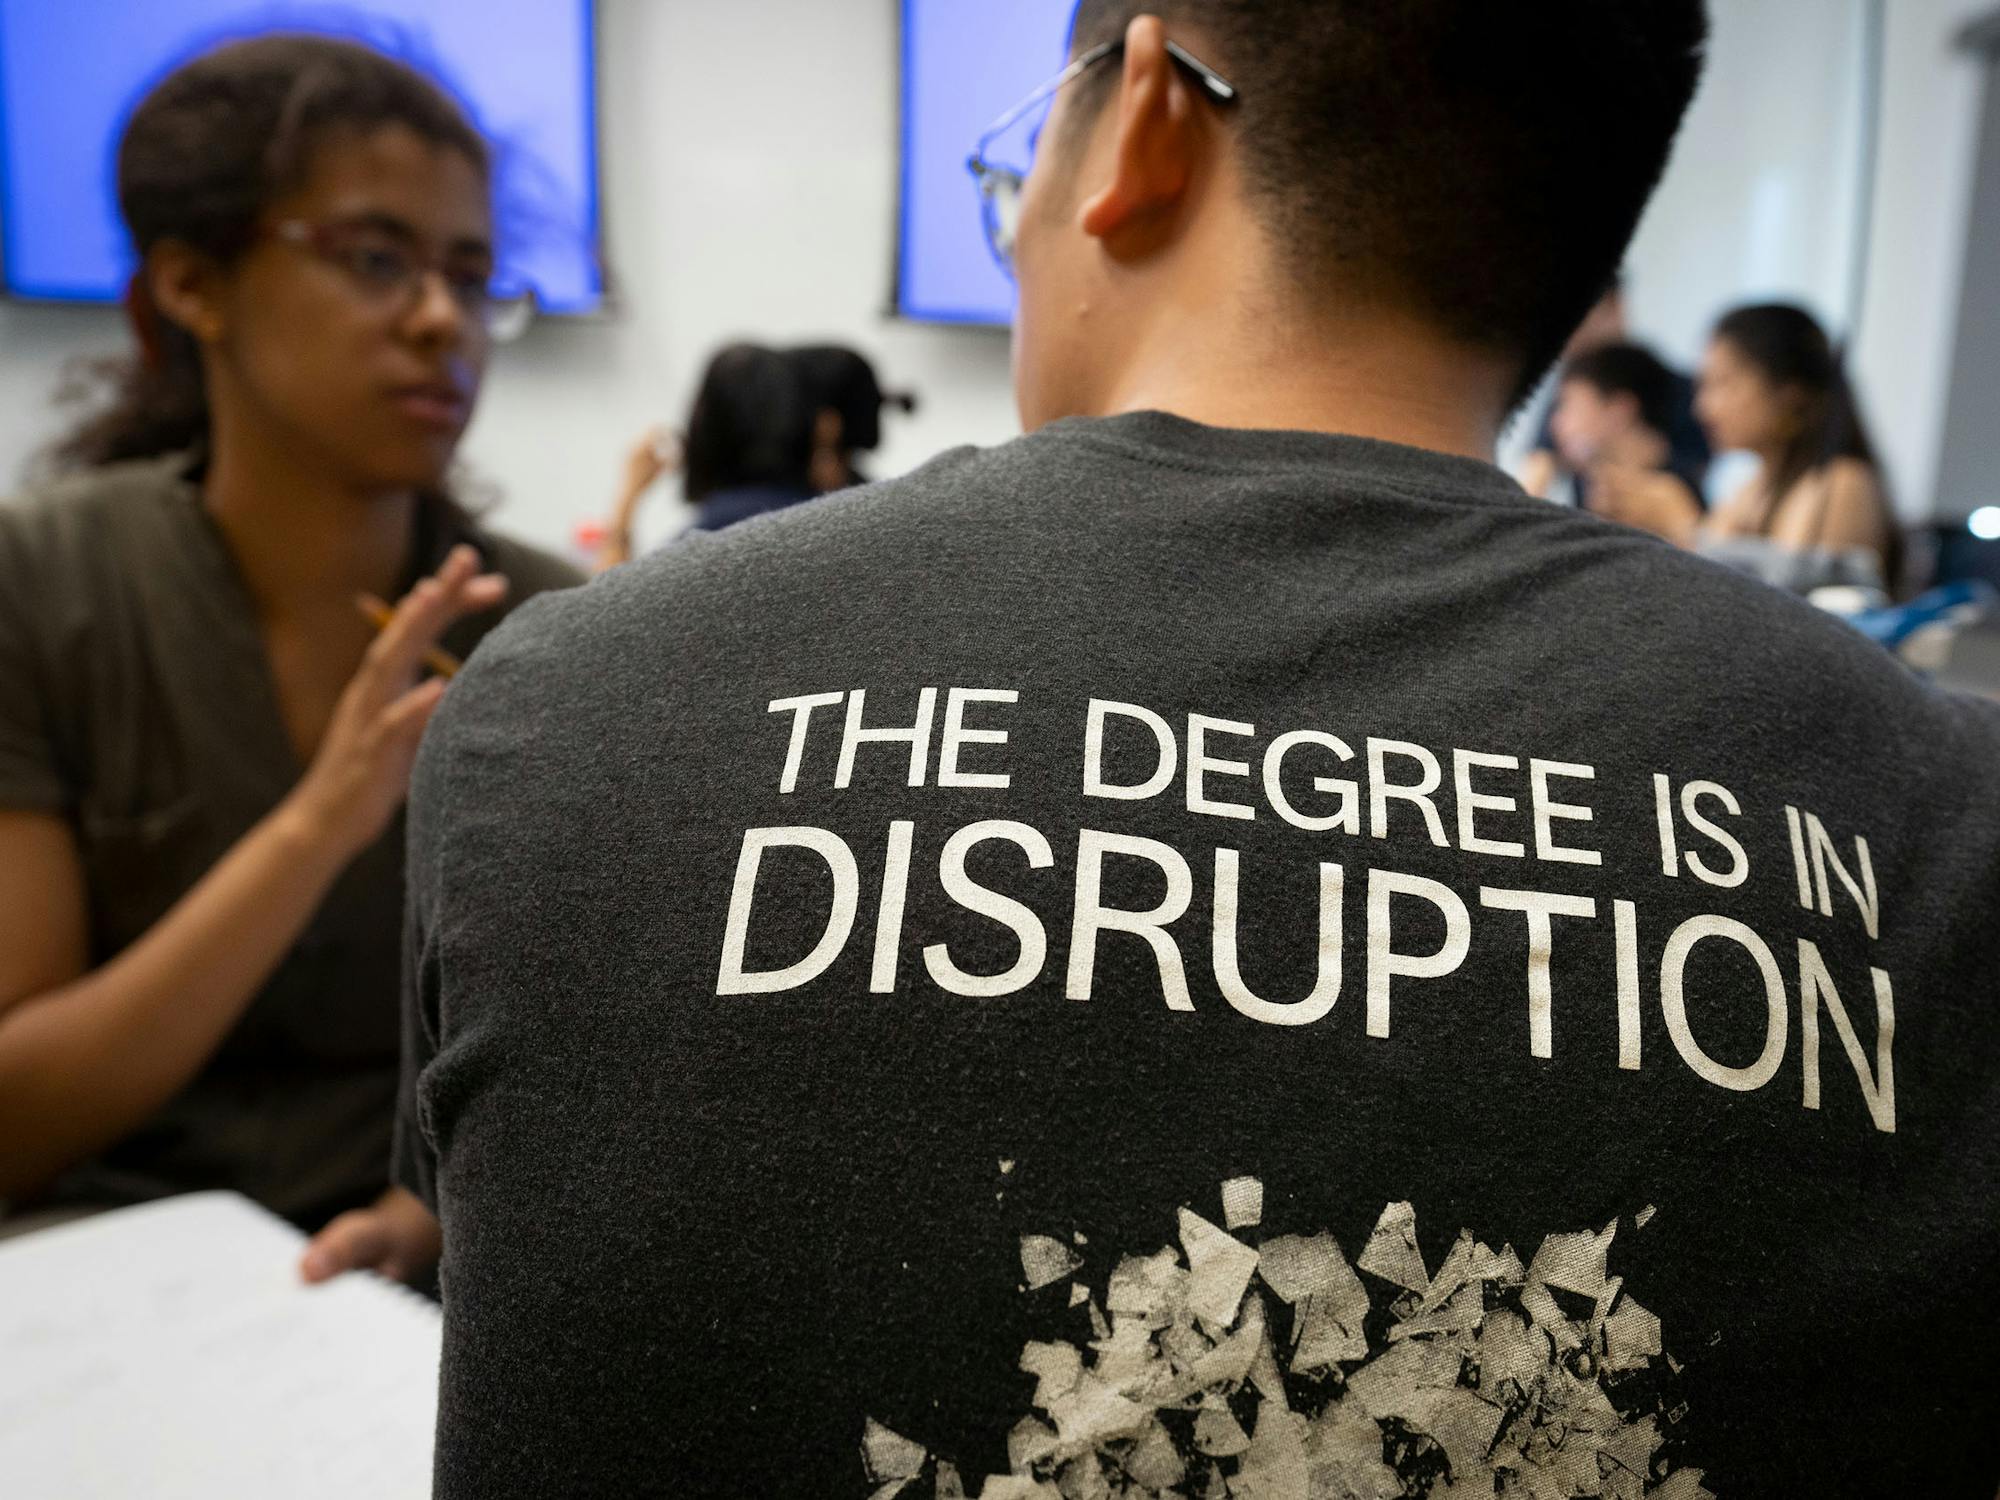 Two students, shirt says the degree is in disruption.